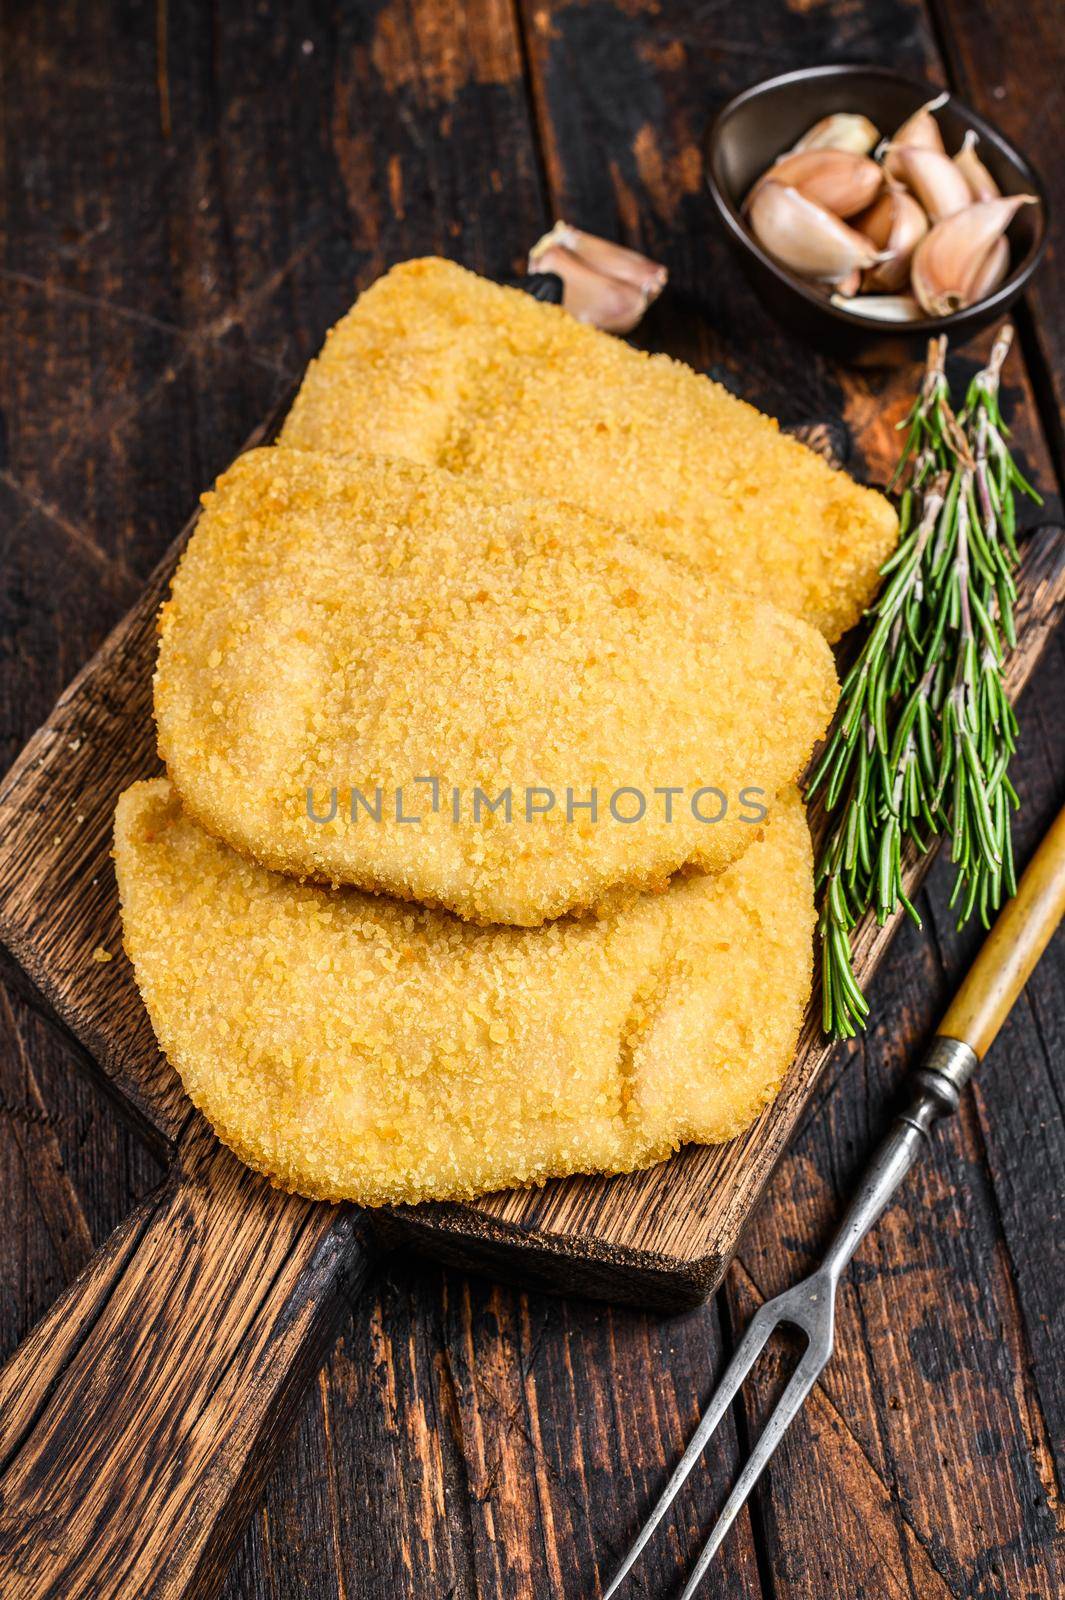 Raw chicken cordon bleu meat cutlets with bread crumbs on a wooden board. Dark wooden background. Top view.